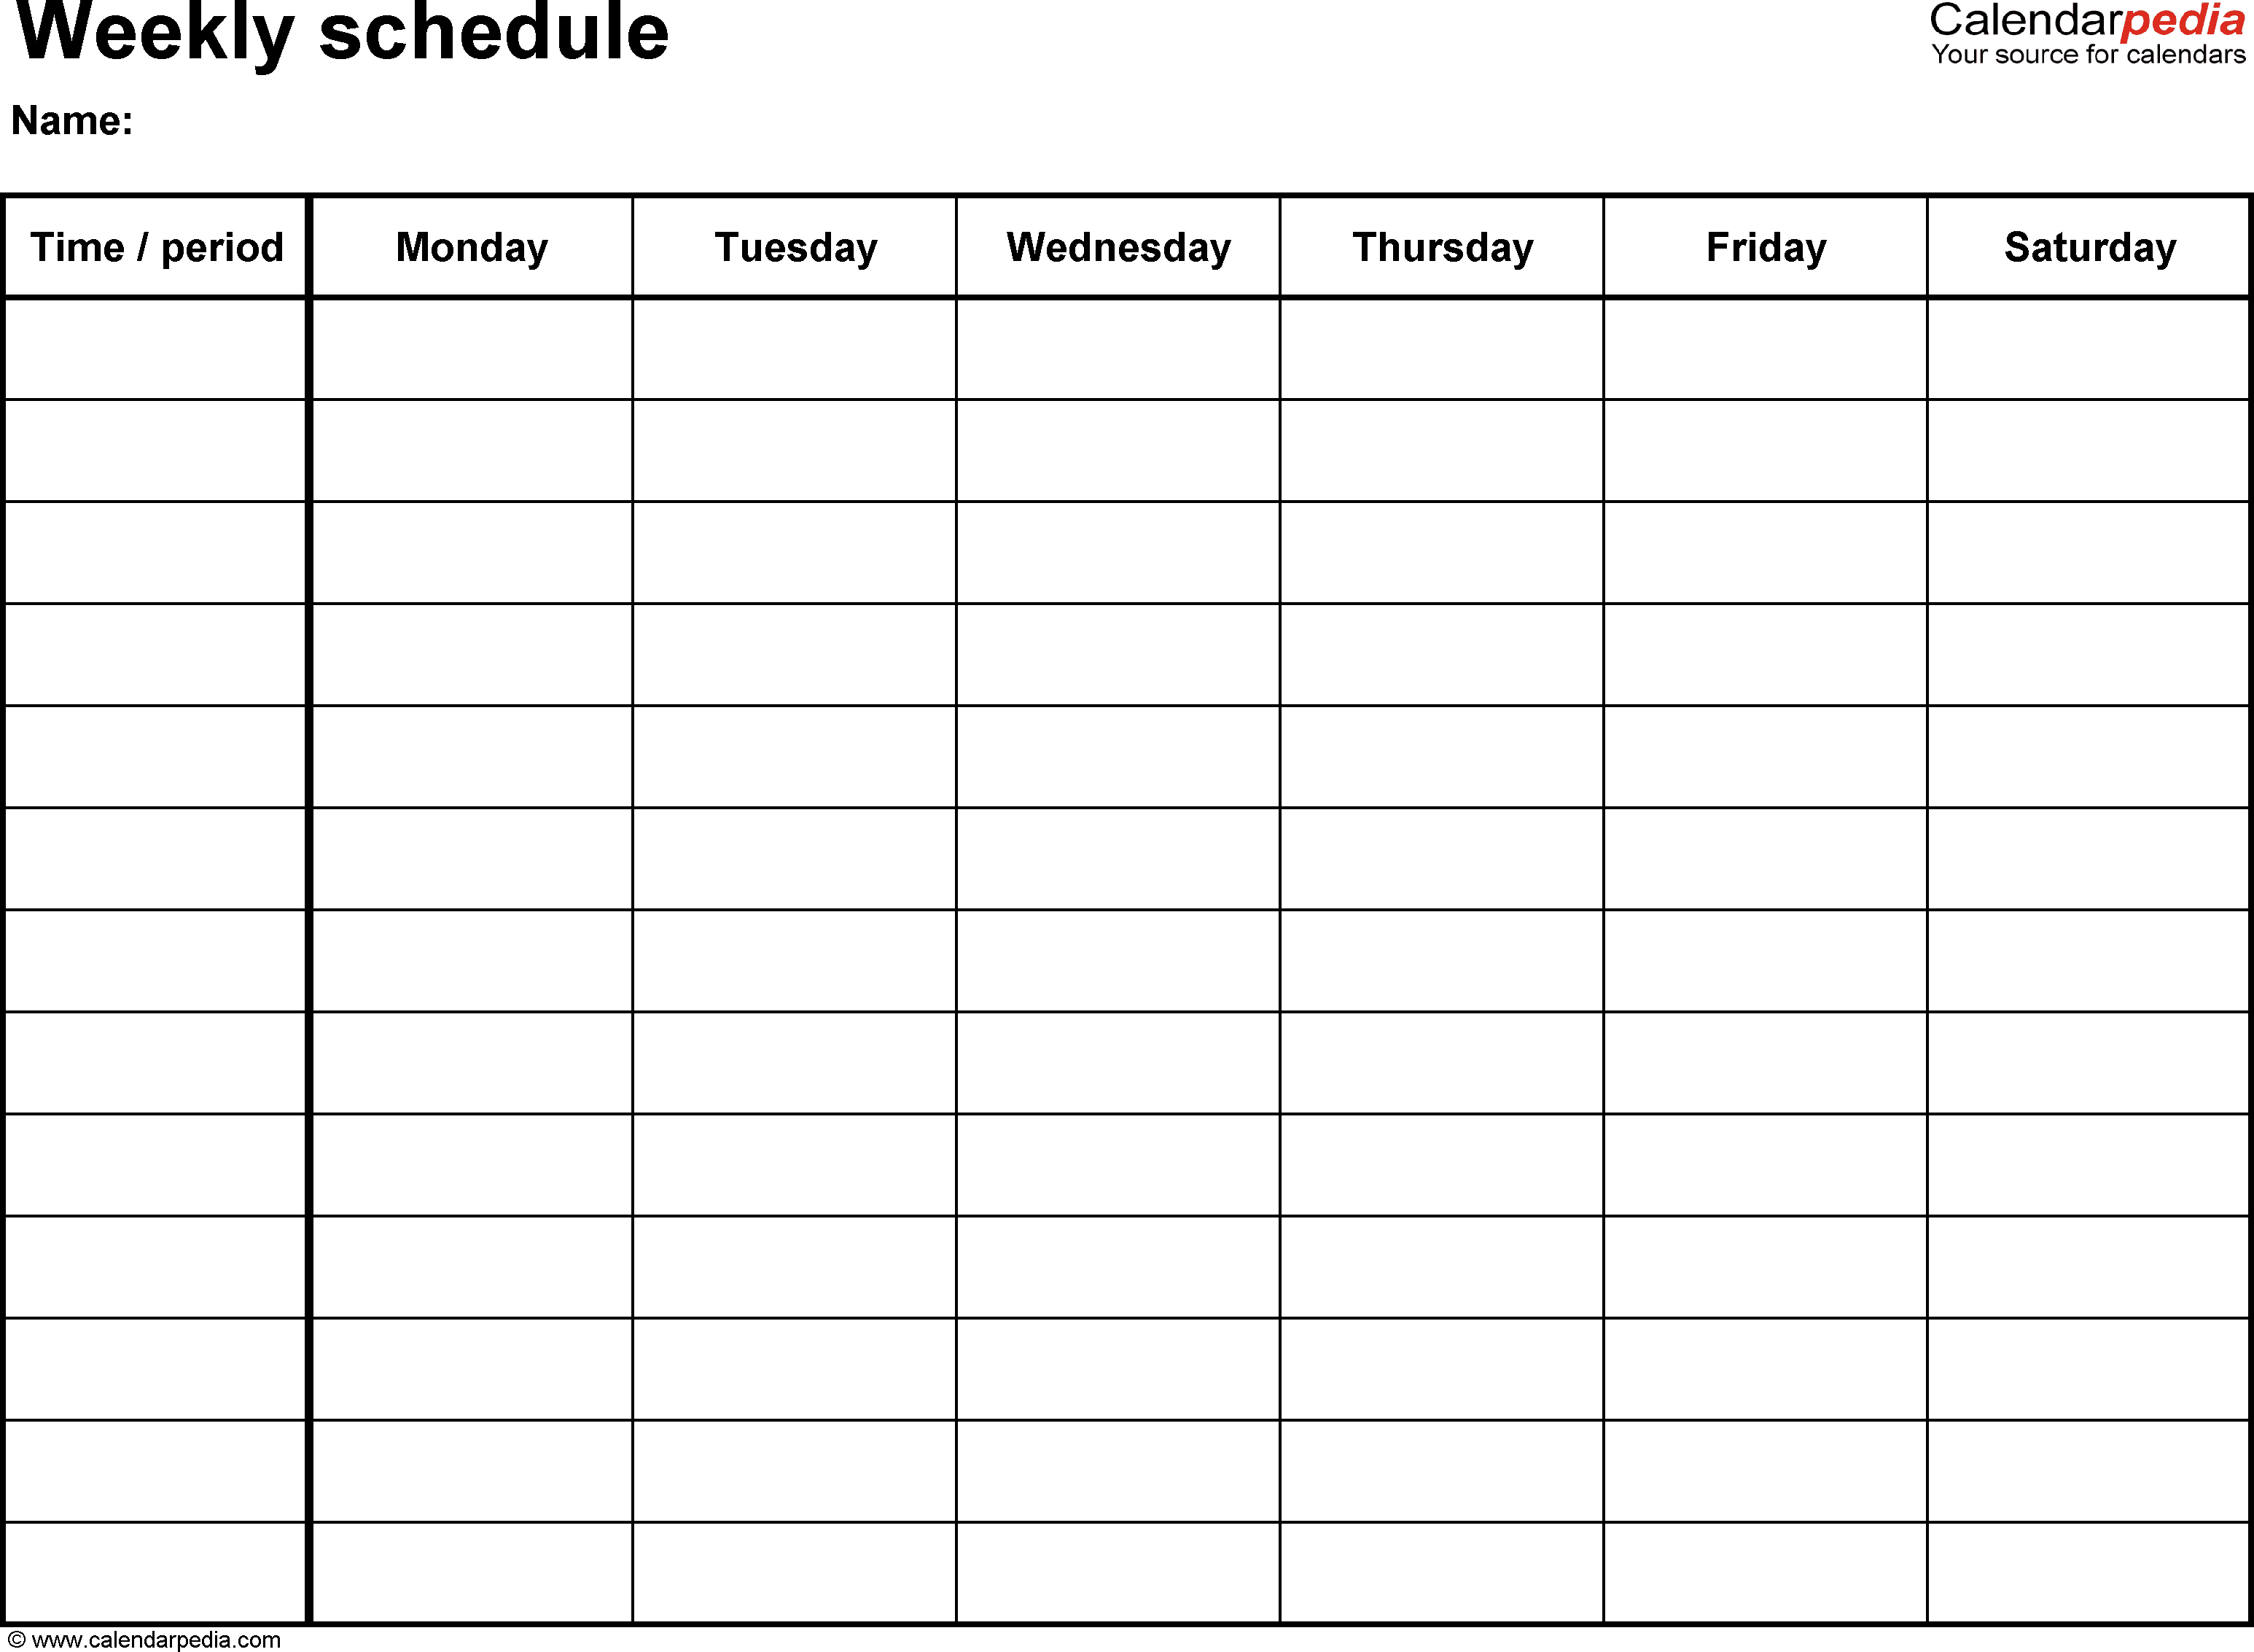 Free Weekly Schedule Templates For Word - 18 Templates - Free Printable Monthly Work Schedule Template